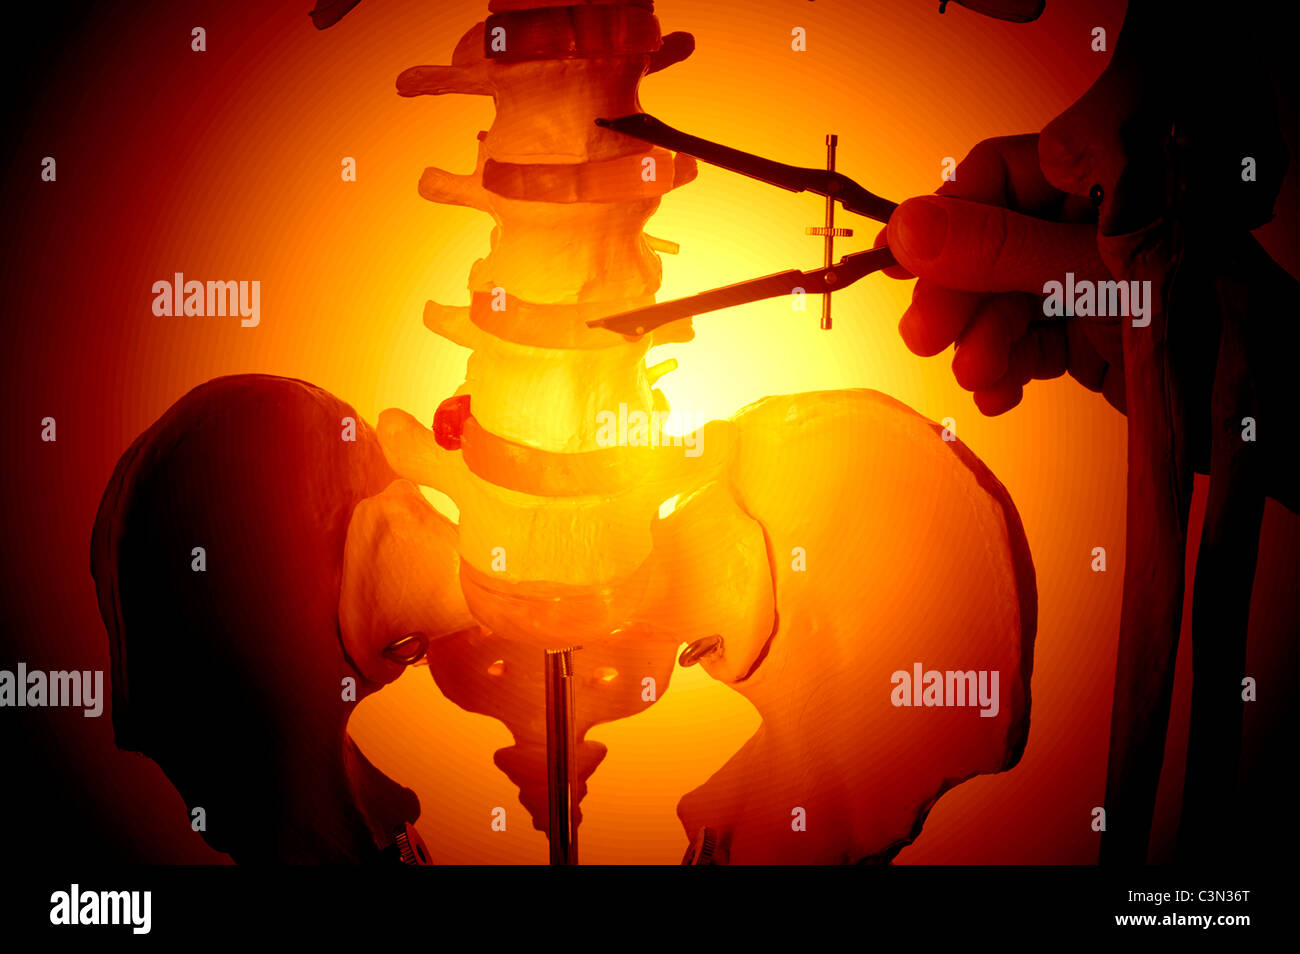 mathematical compass used to measure anatomical skeleton model spinal column area Stock Photo